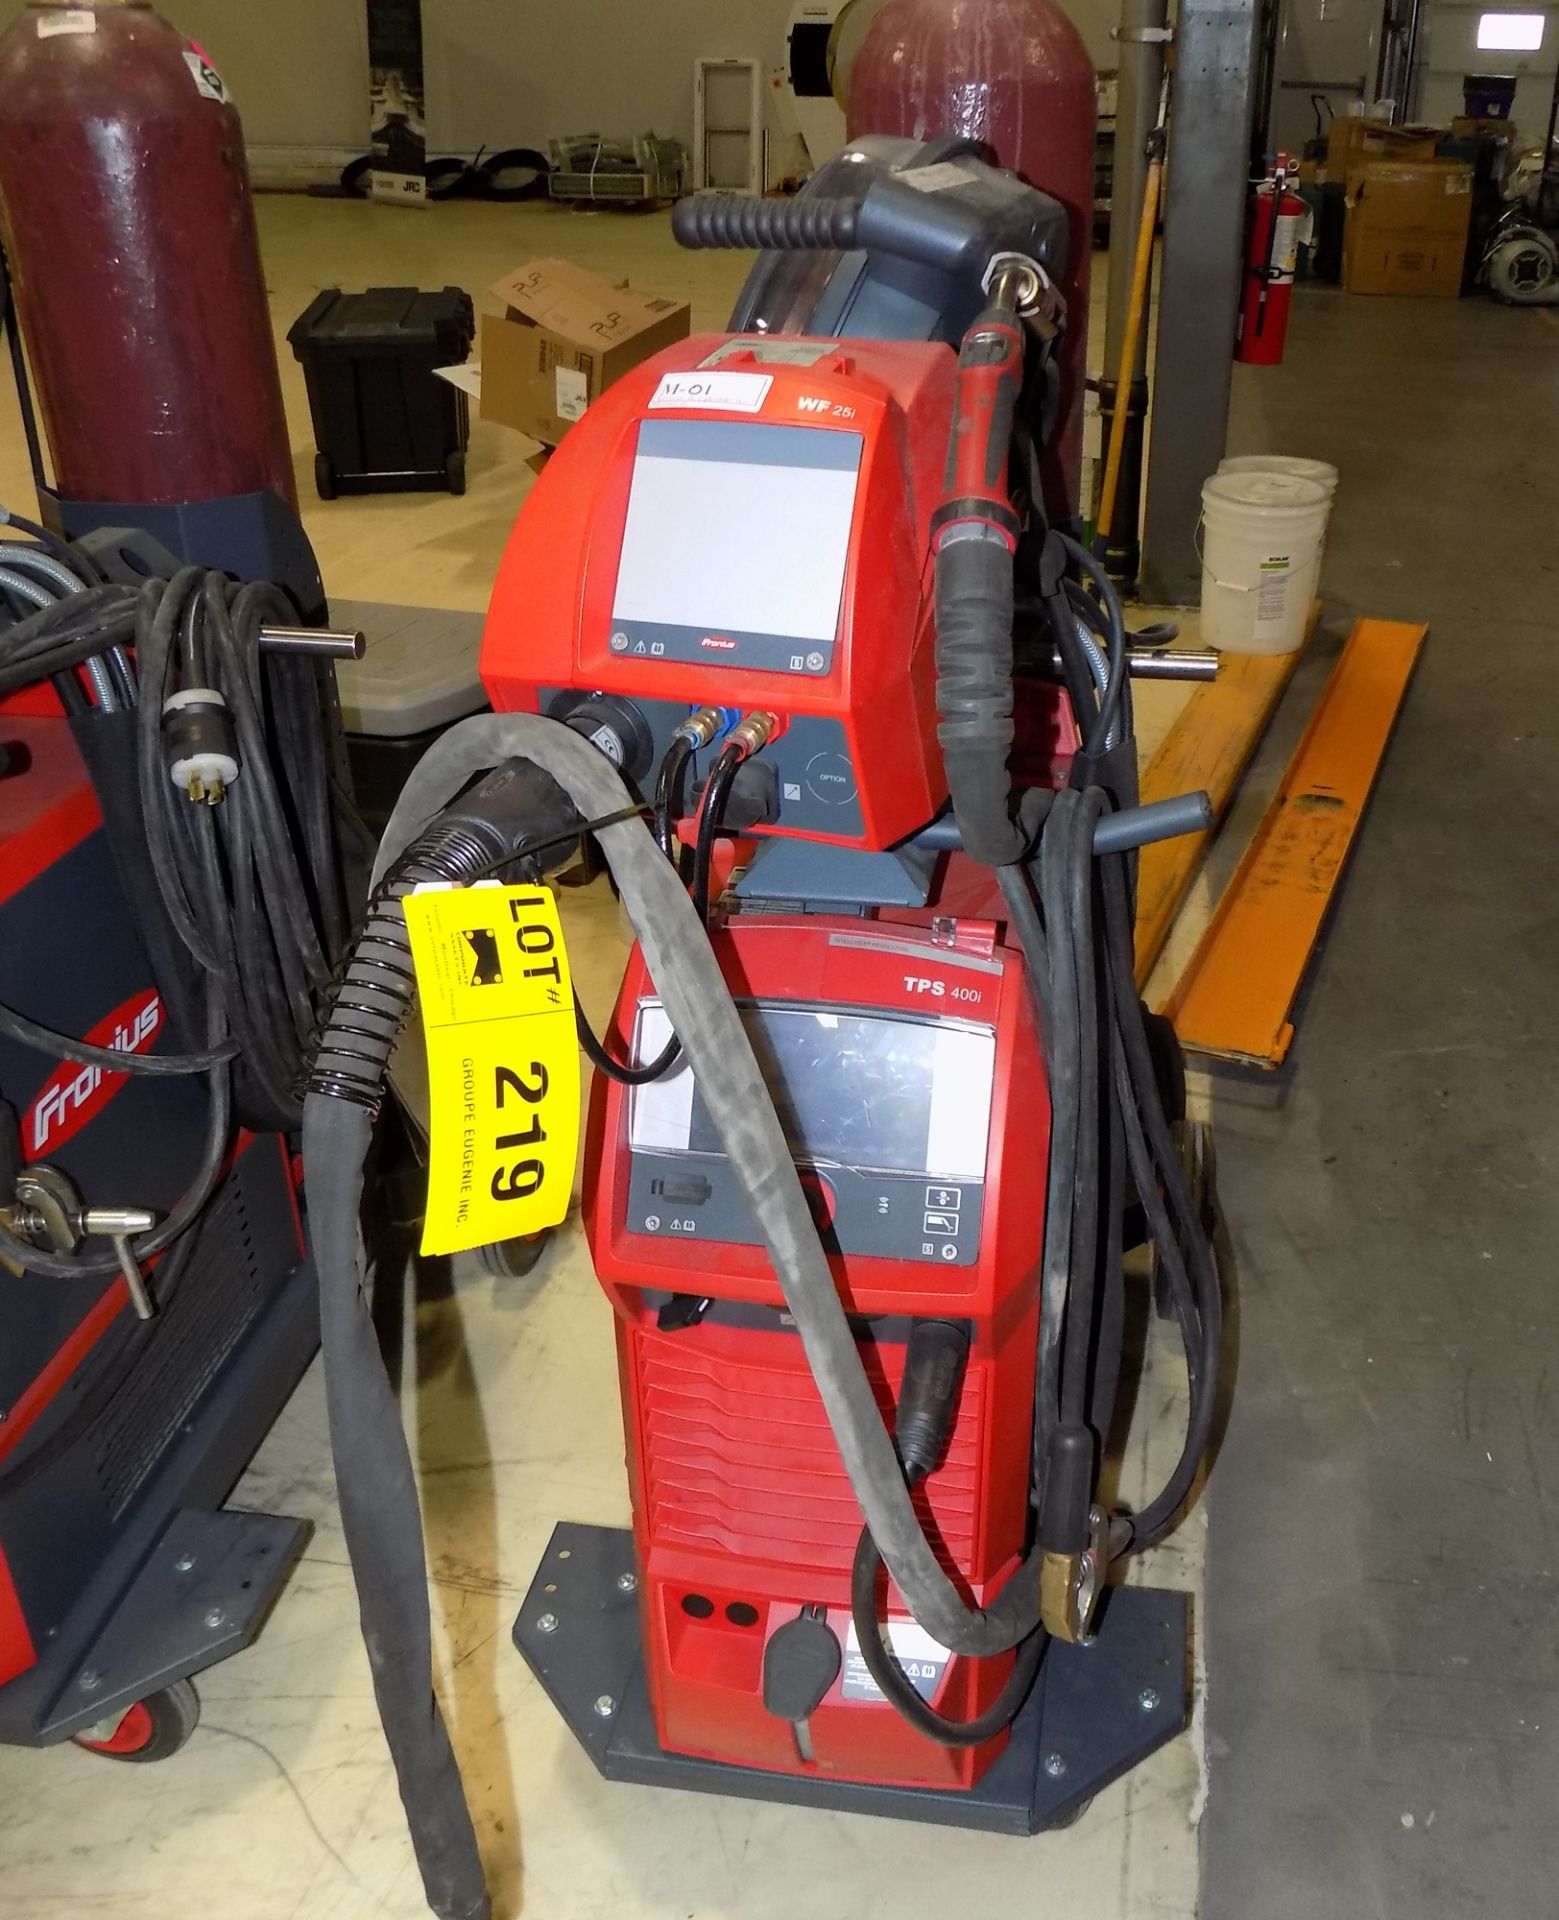 FRONIUS (2018) TPS 400I PULSE HEAVY DUTY DIGITAL MIG WELDER WITH WIRE FEEDER, CABLES AND GUN, S/N